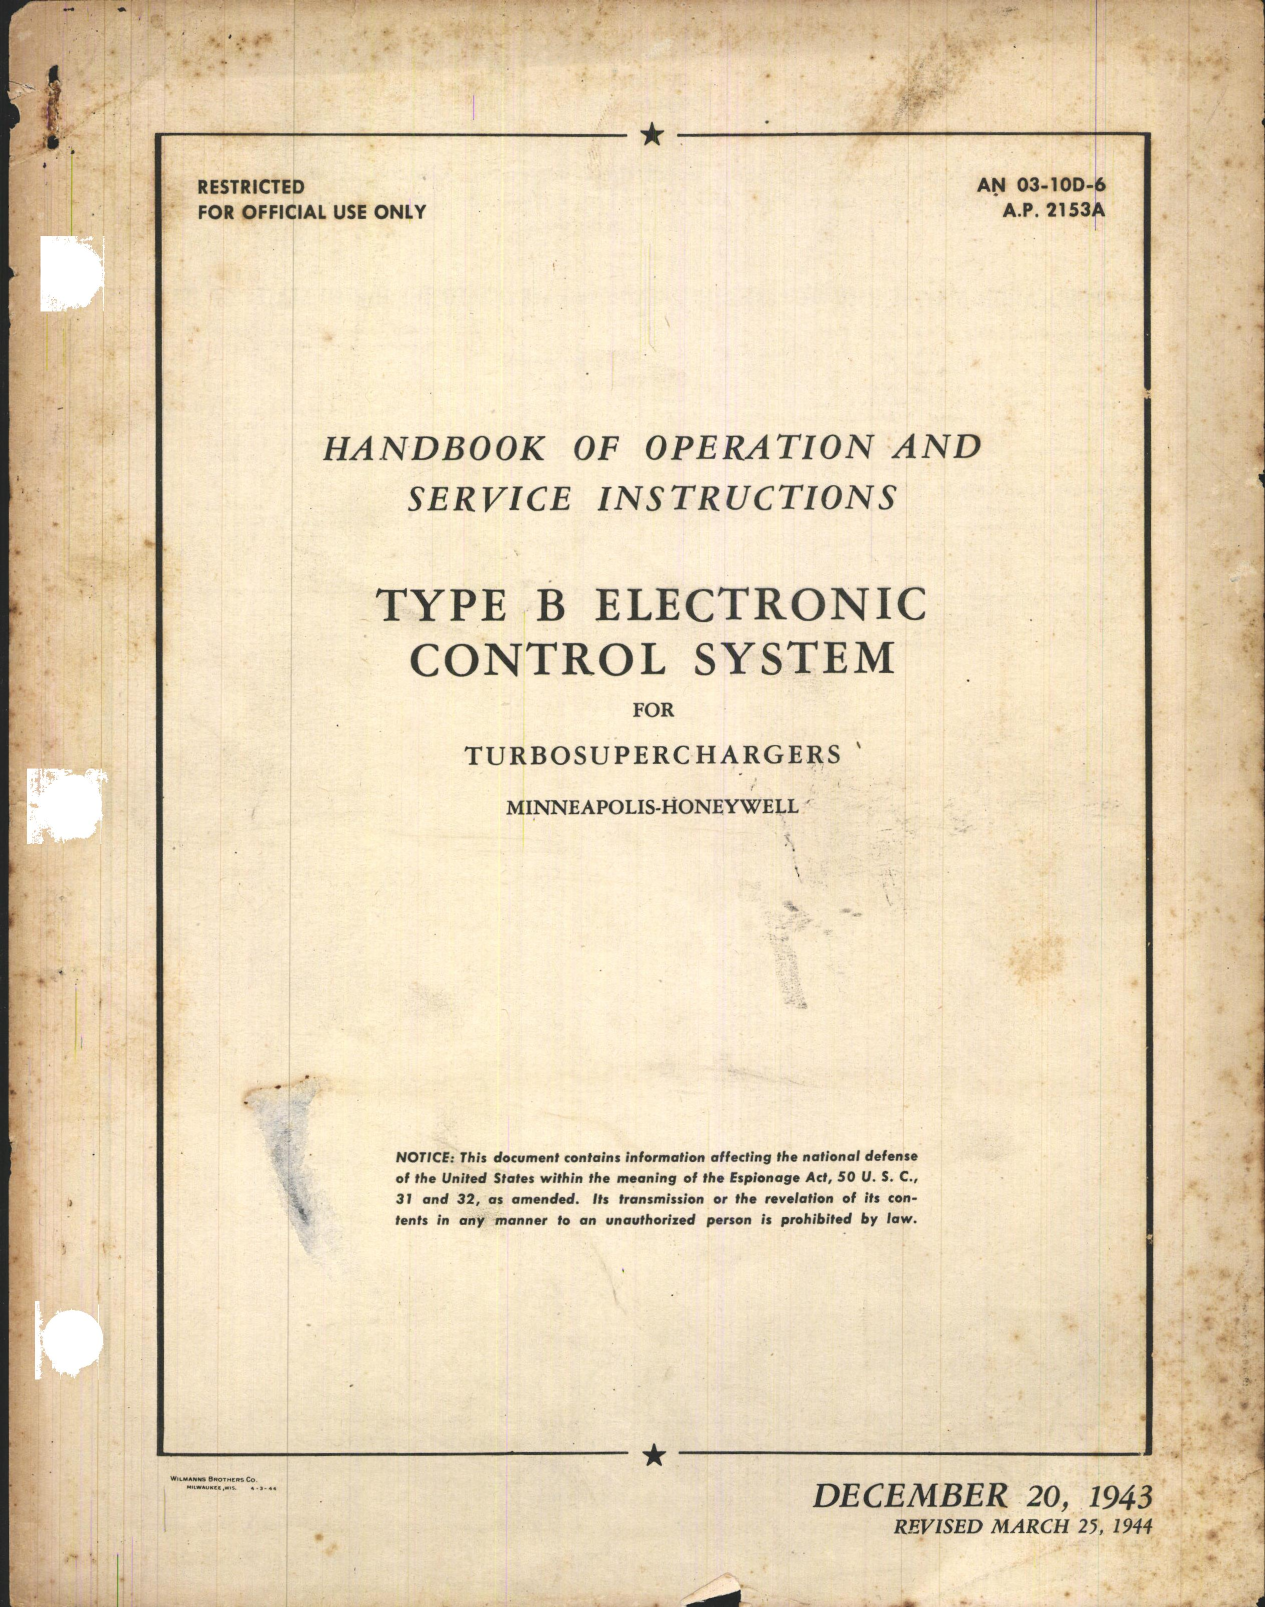 Sample page 1 from AirCorps Library document: Operation and Service Instructions for Type B Electronic Control System for Turbosuperchargers